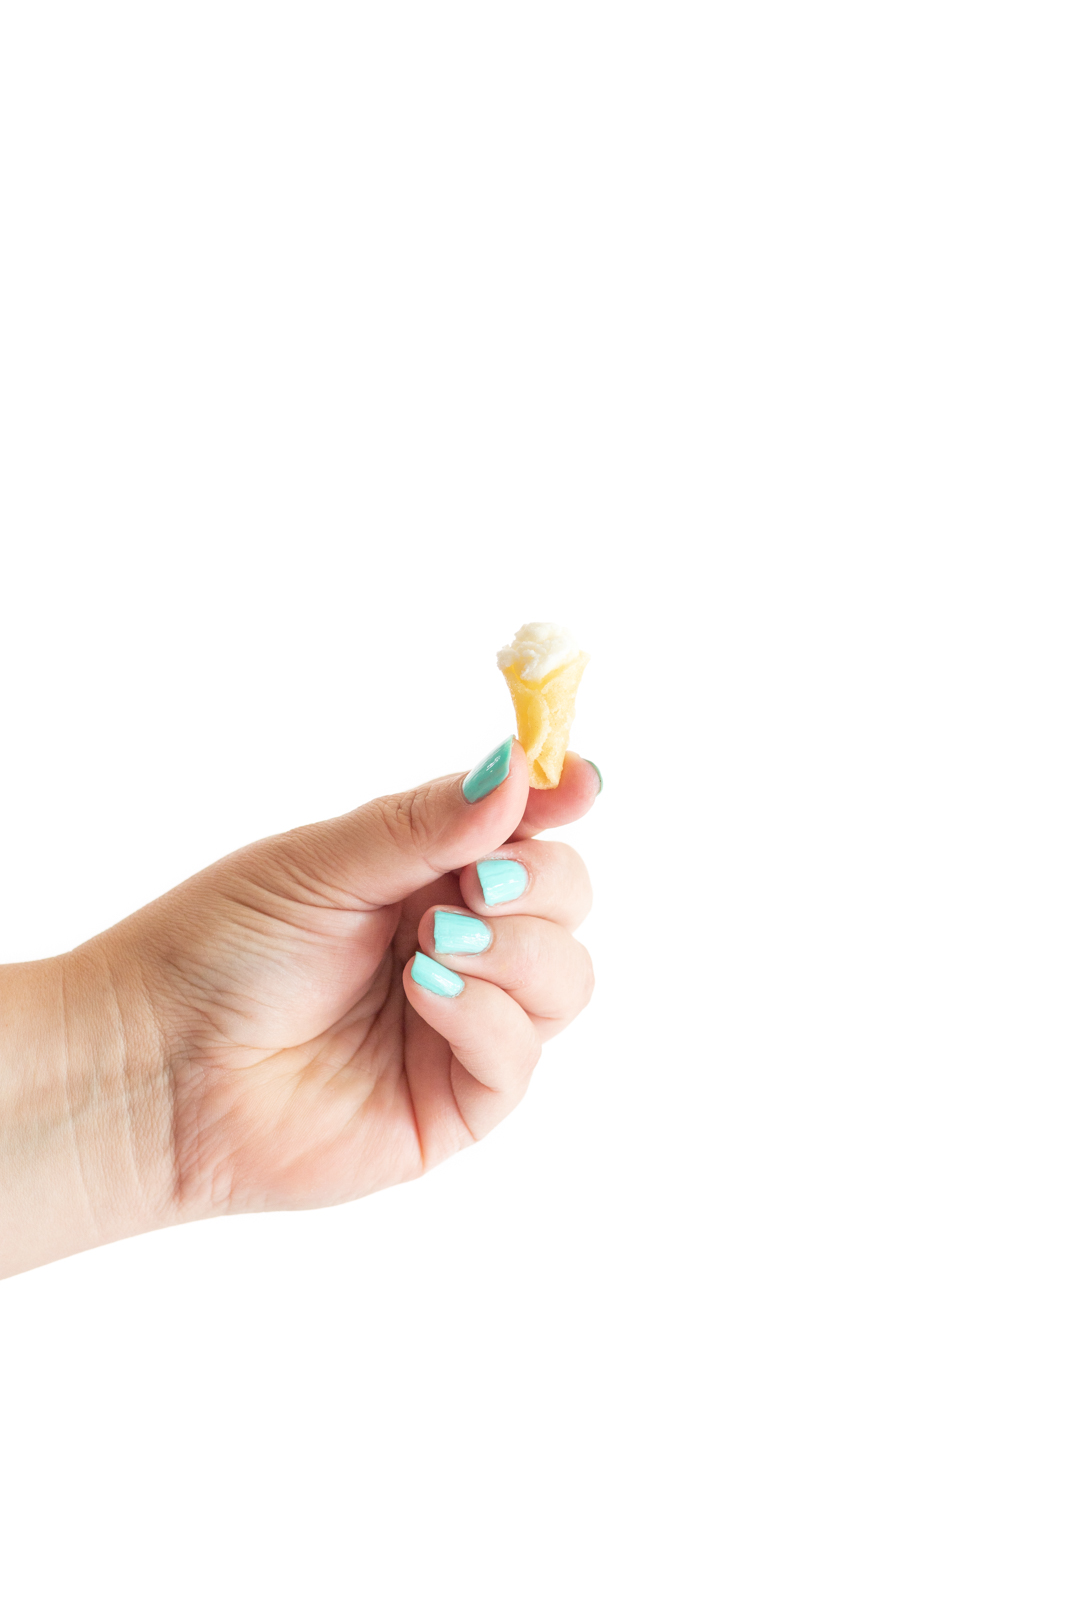 woman holding a tiny ice cream cone with a scoop of tiny vanilla ice cream in it